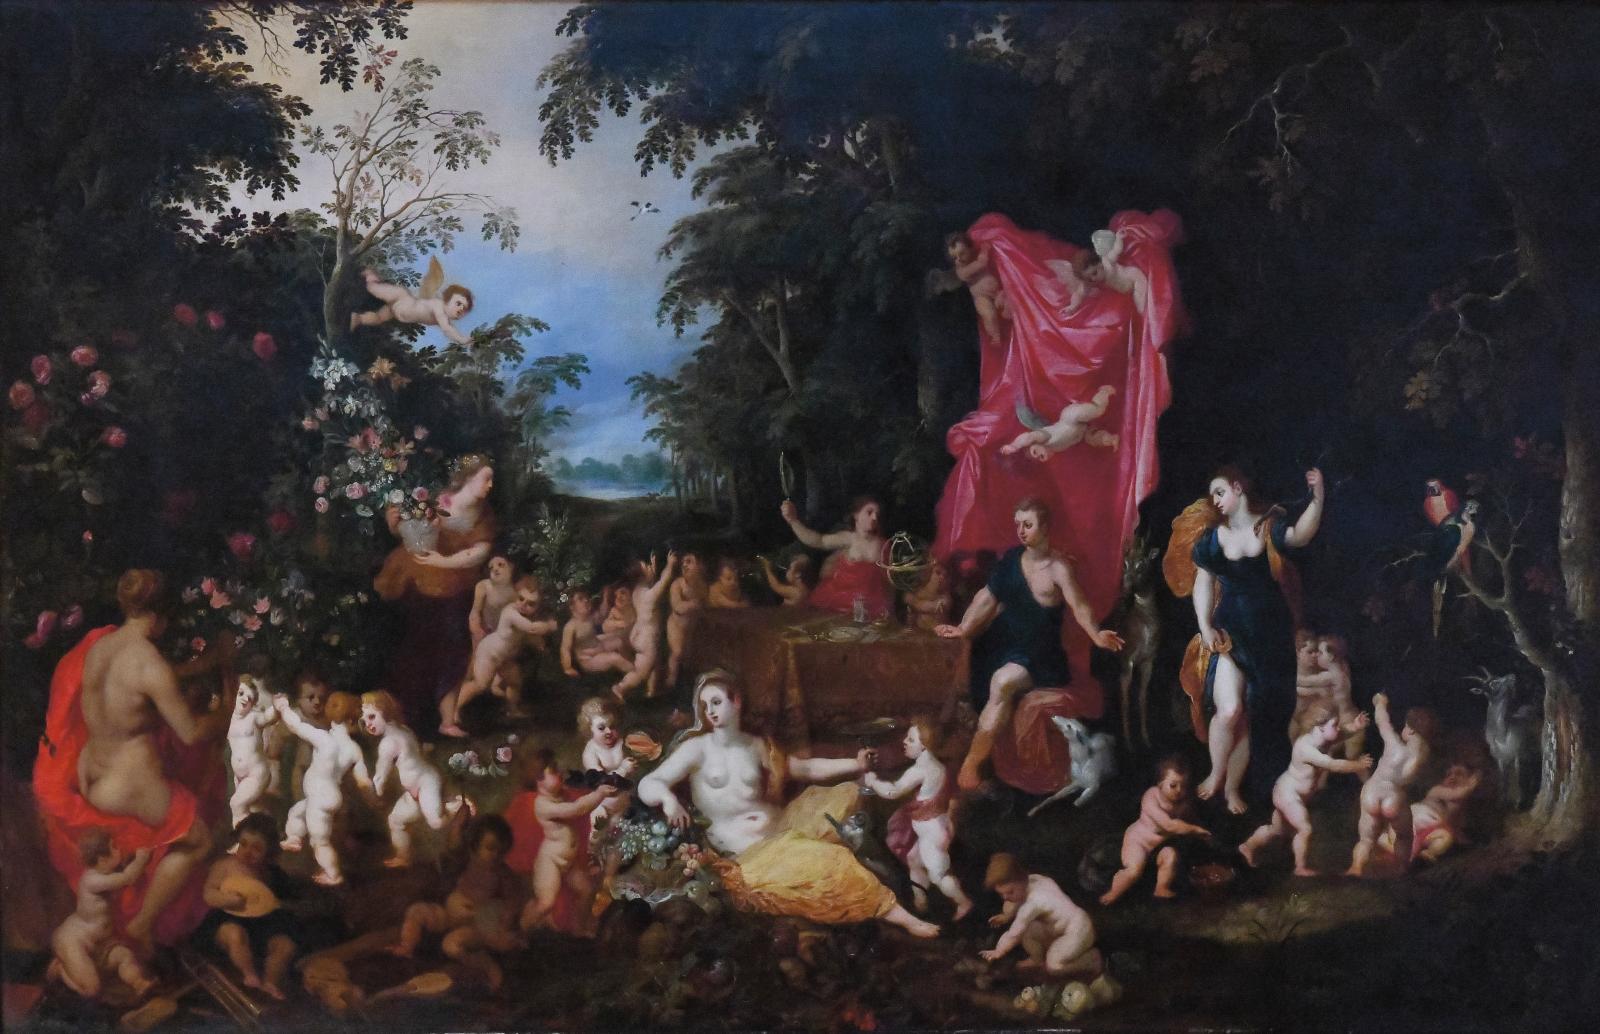 Jan Bruegel the Younger and Hendrick Van Balen: A Duo for an Unusual Theme